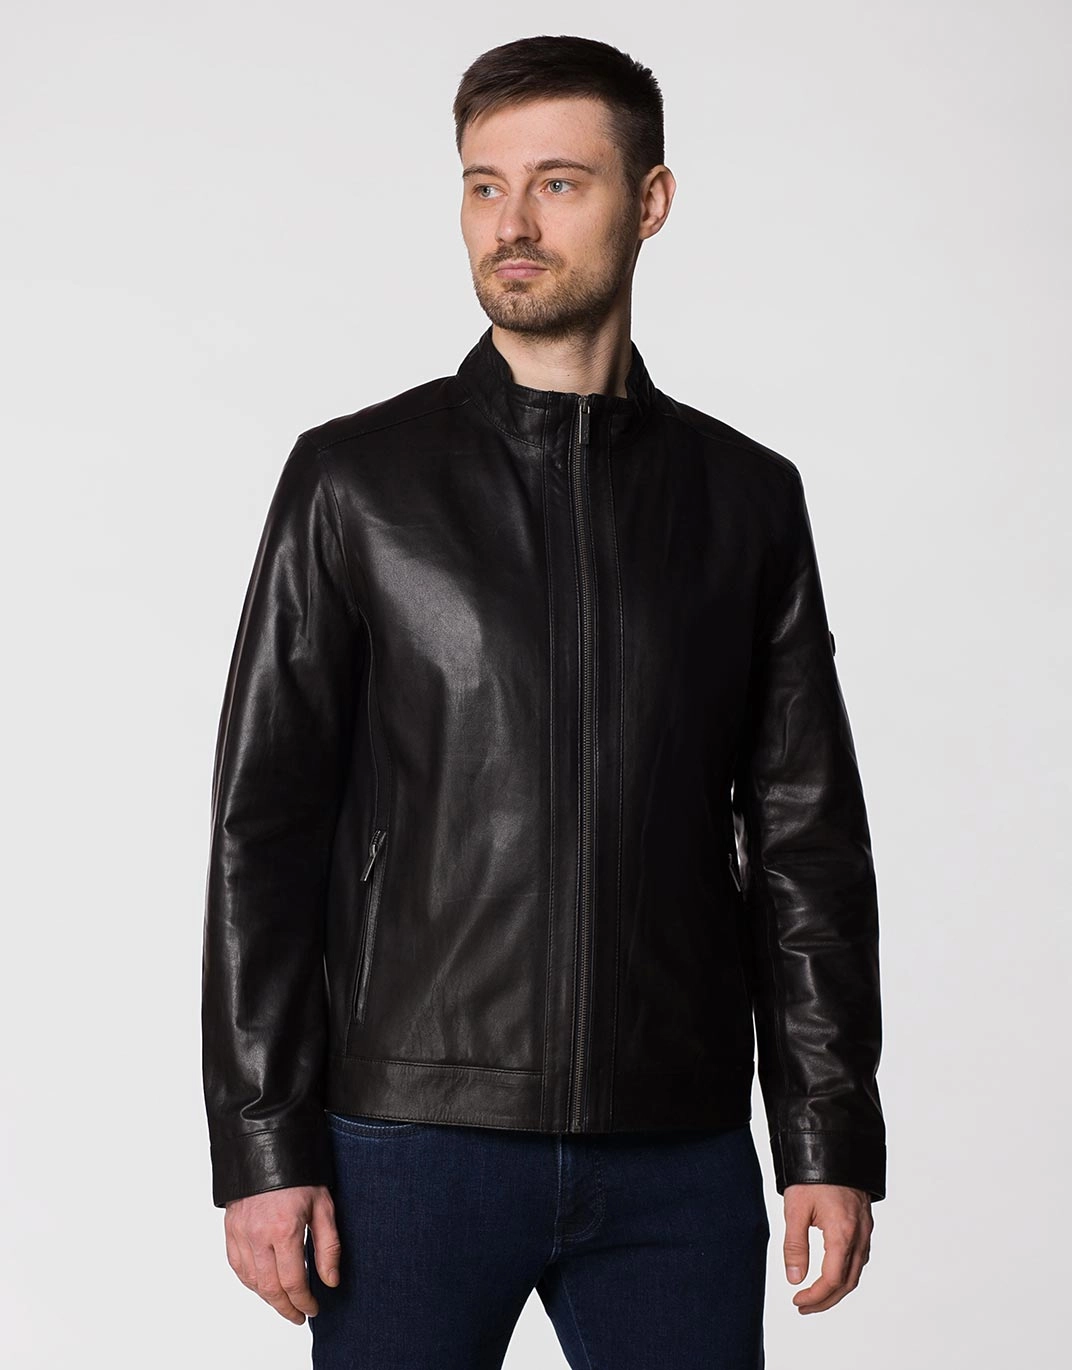 Gallantry at home exciting ⏩Pierre Cardin leather jacket in black PCE200796 ᐈ Price 15552 UAH ᐈ Buy in  the online store Pierre Cardin